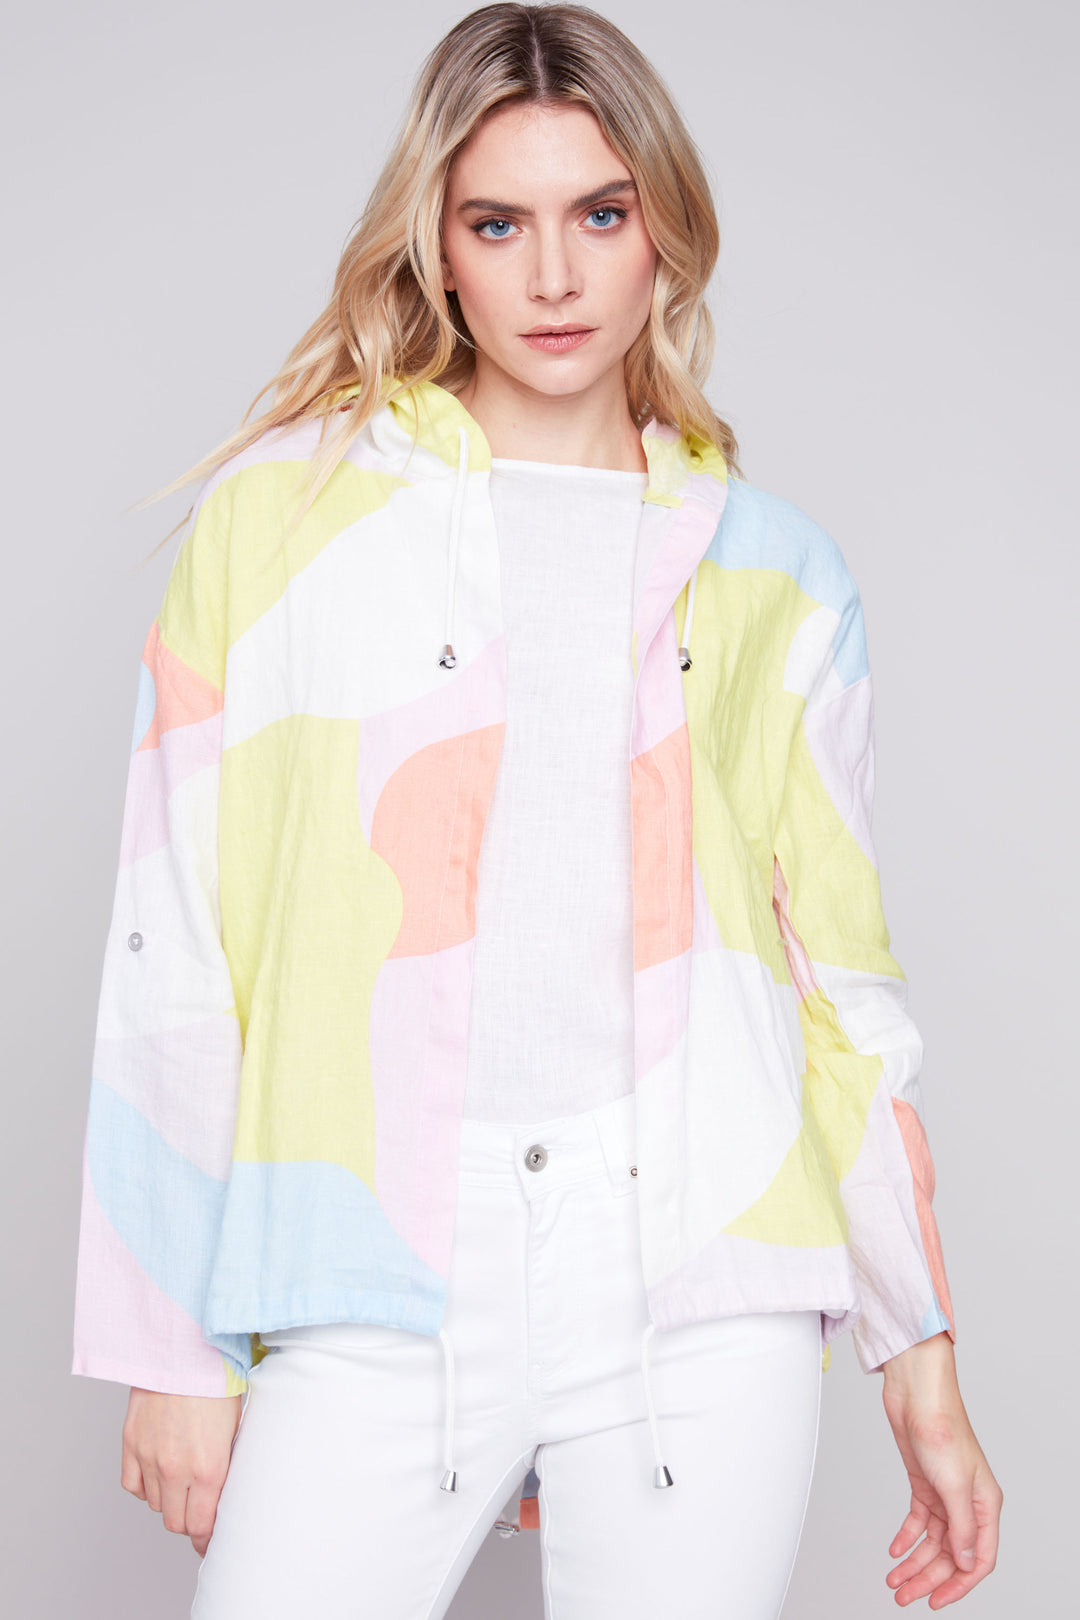 This gorgeous Print Hoodie Jacket is perfect for layering and with its charming Easter inspired print, hooded construction and drawstring detailing along the waist is made for spring days!